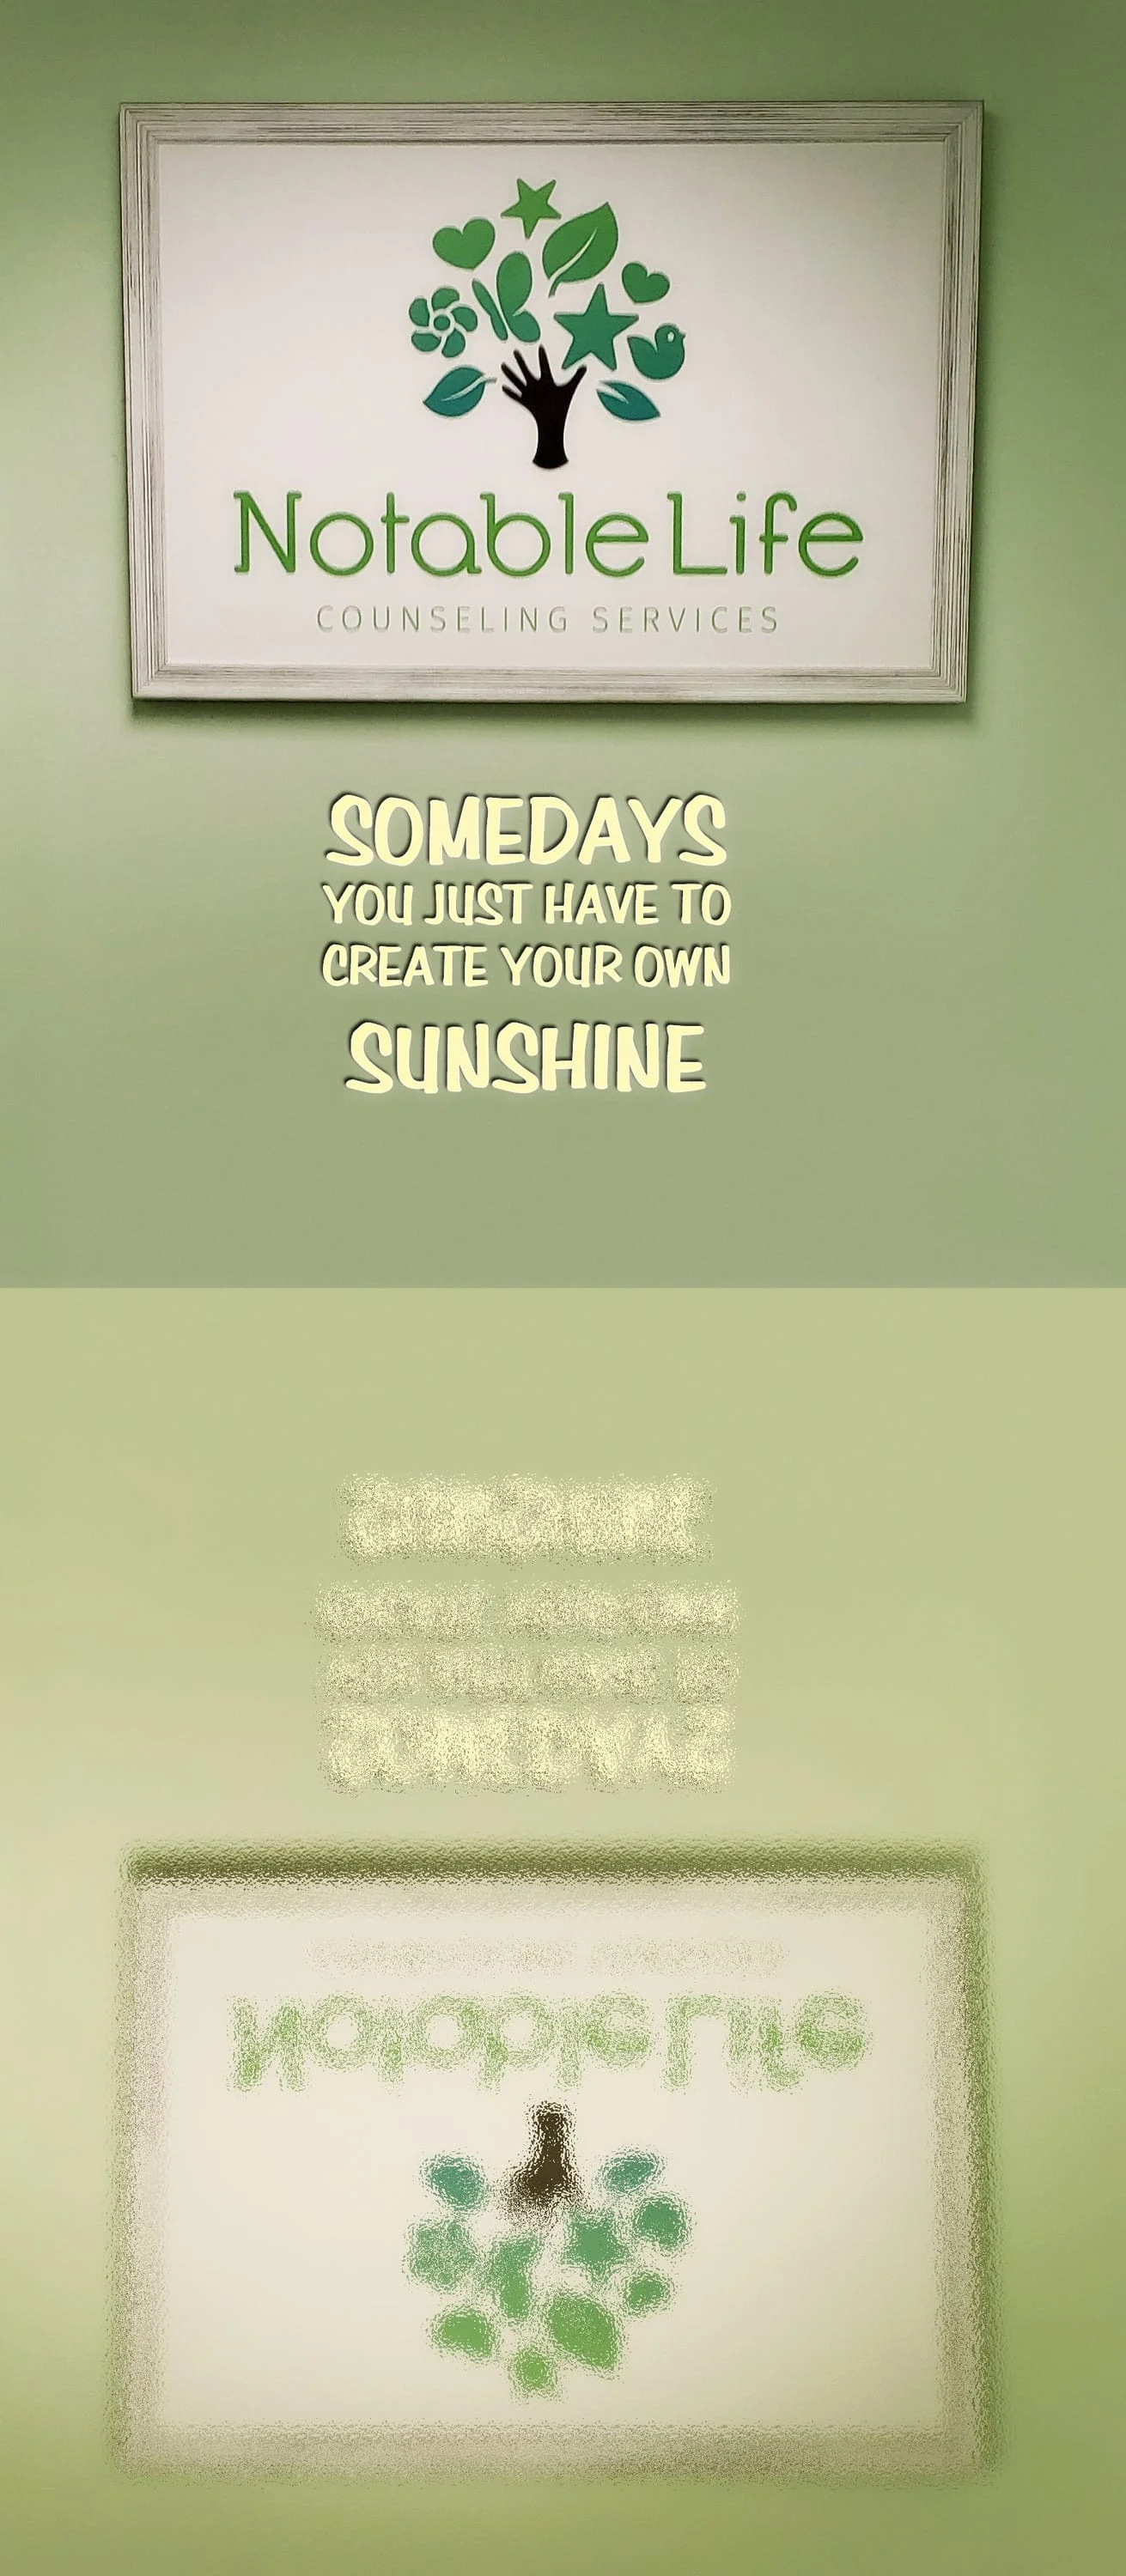 somedays you have to Create your own Sunshine